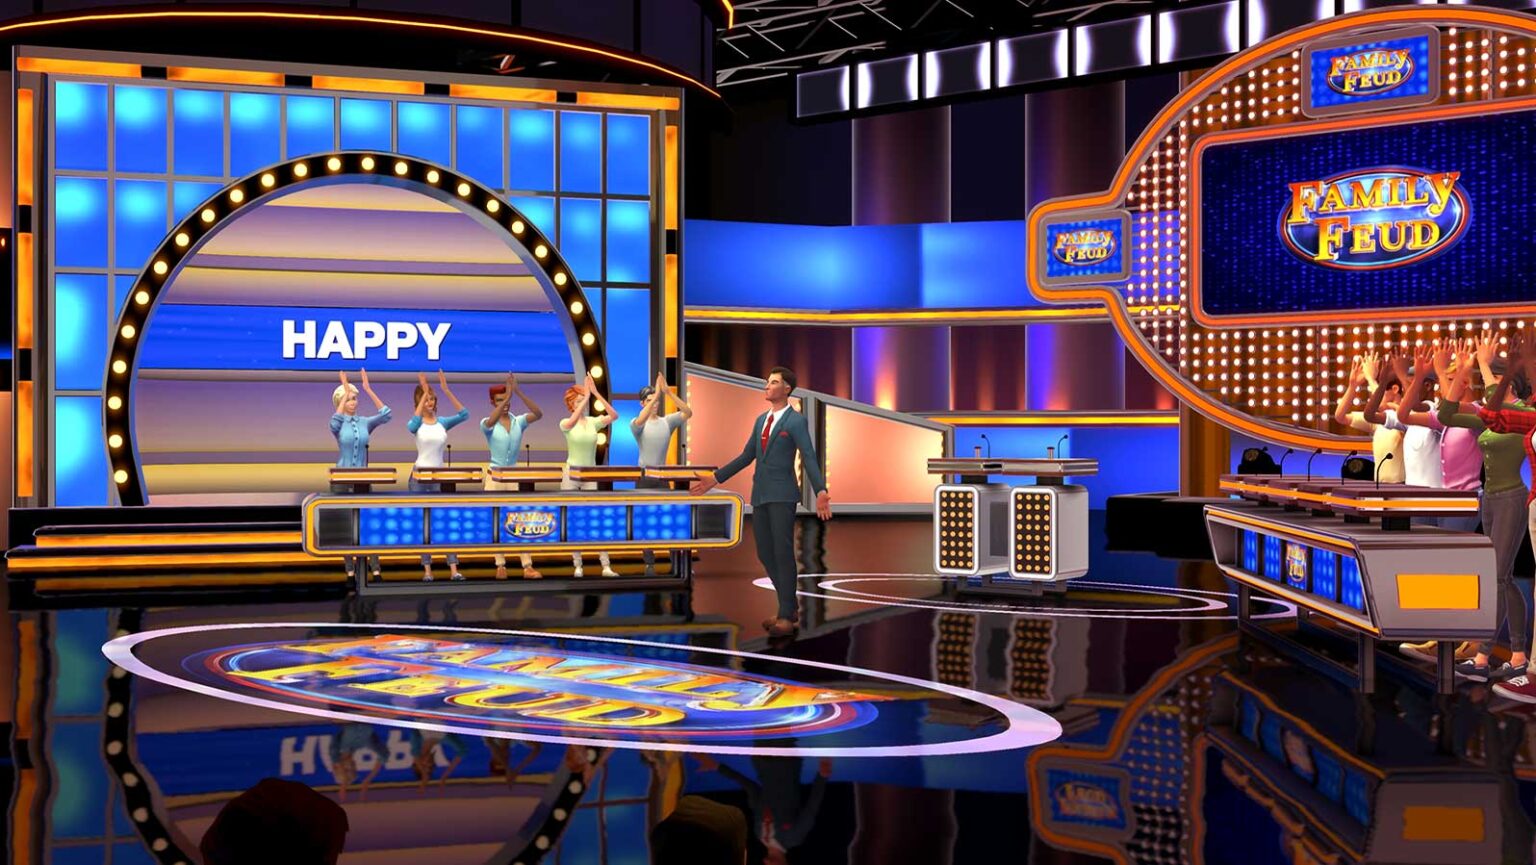 New Family Feud video game is now available!